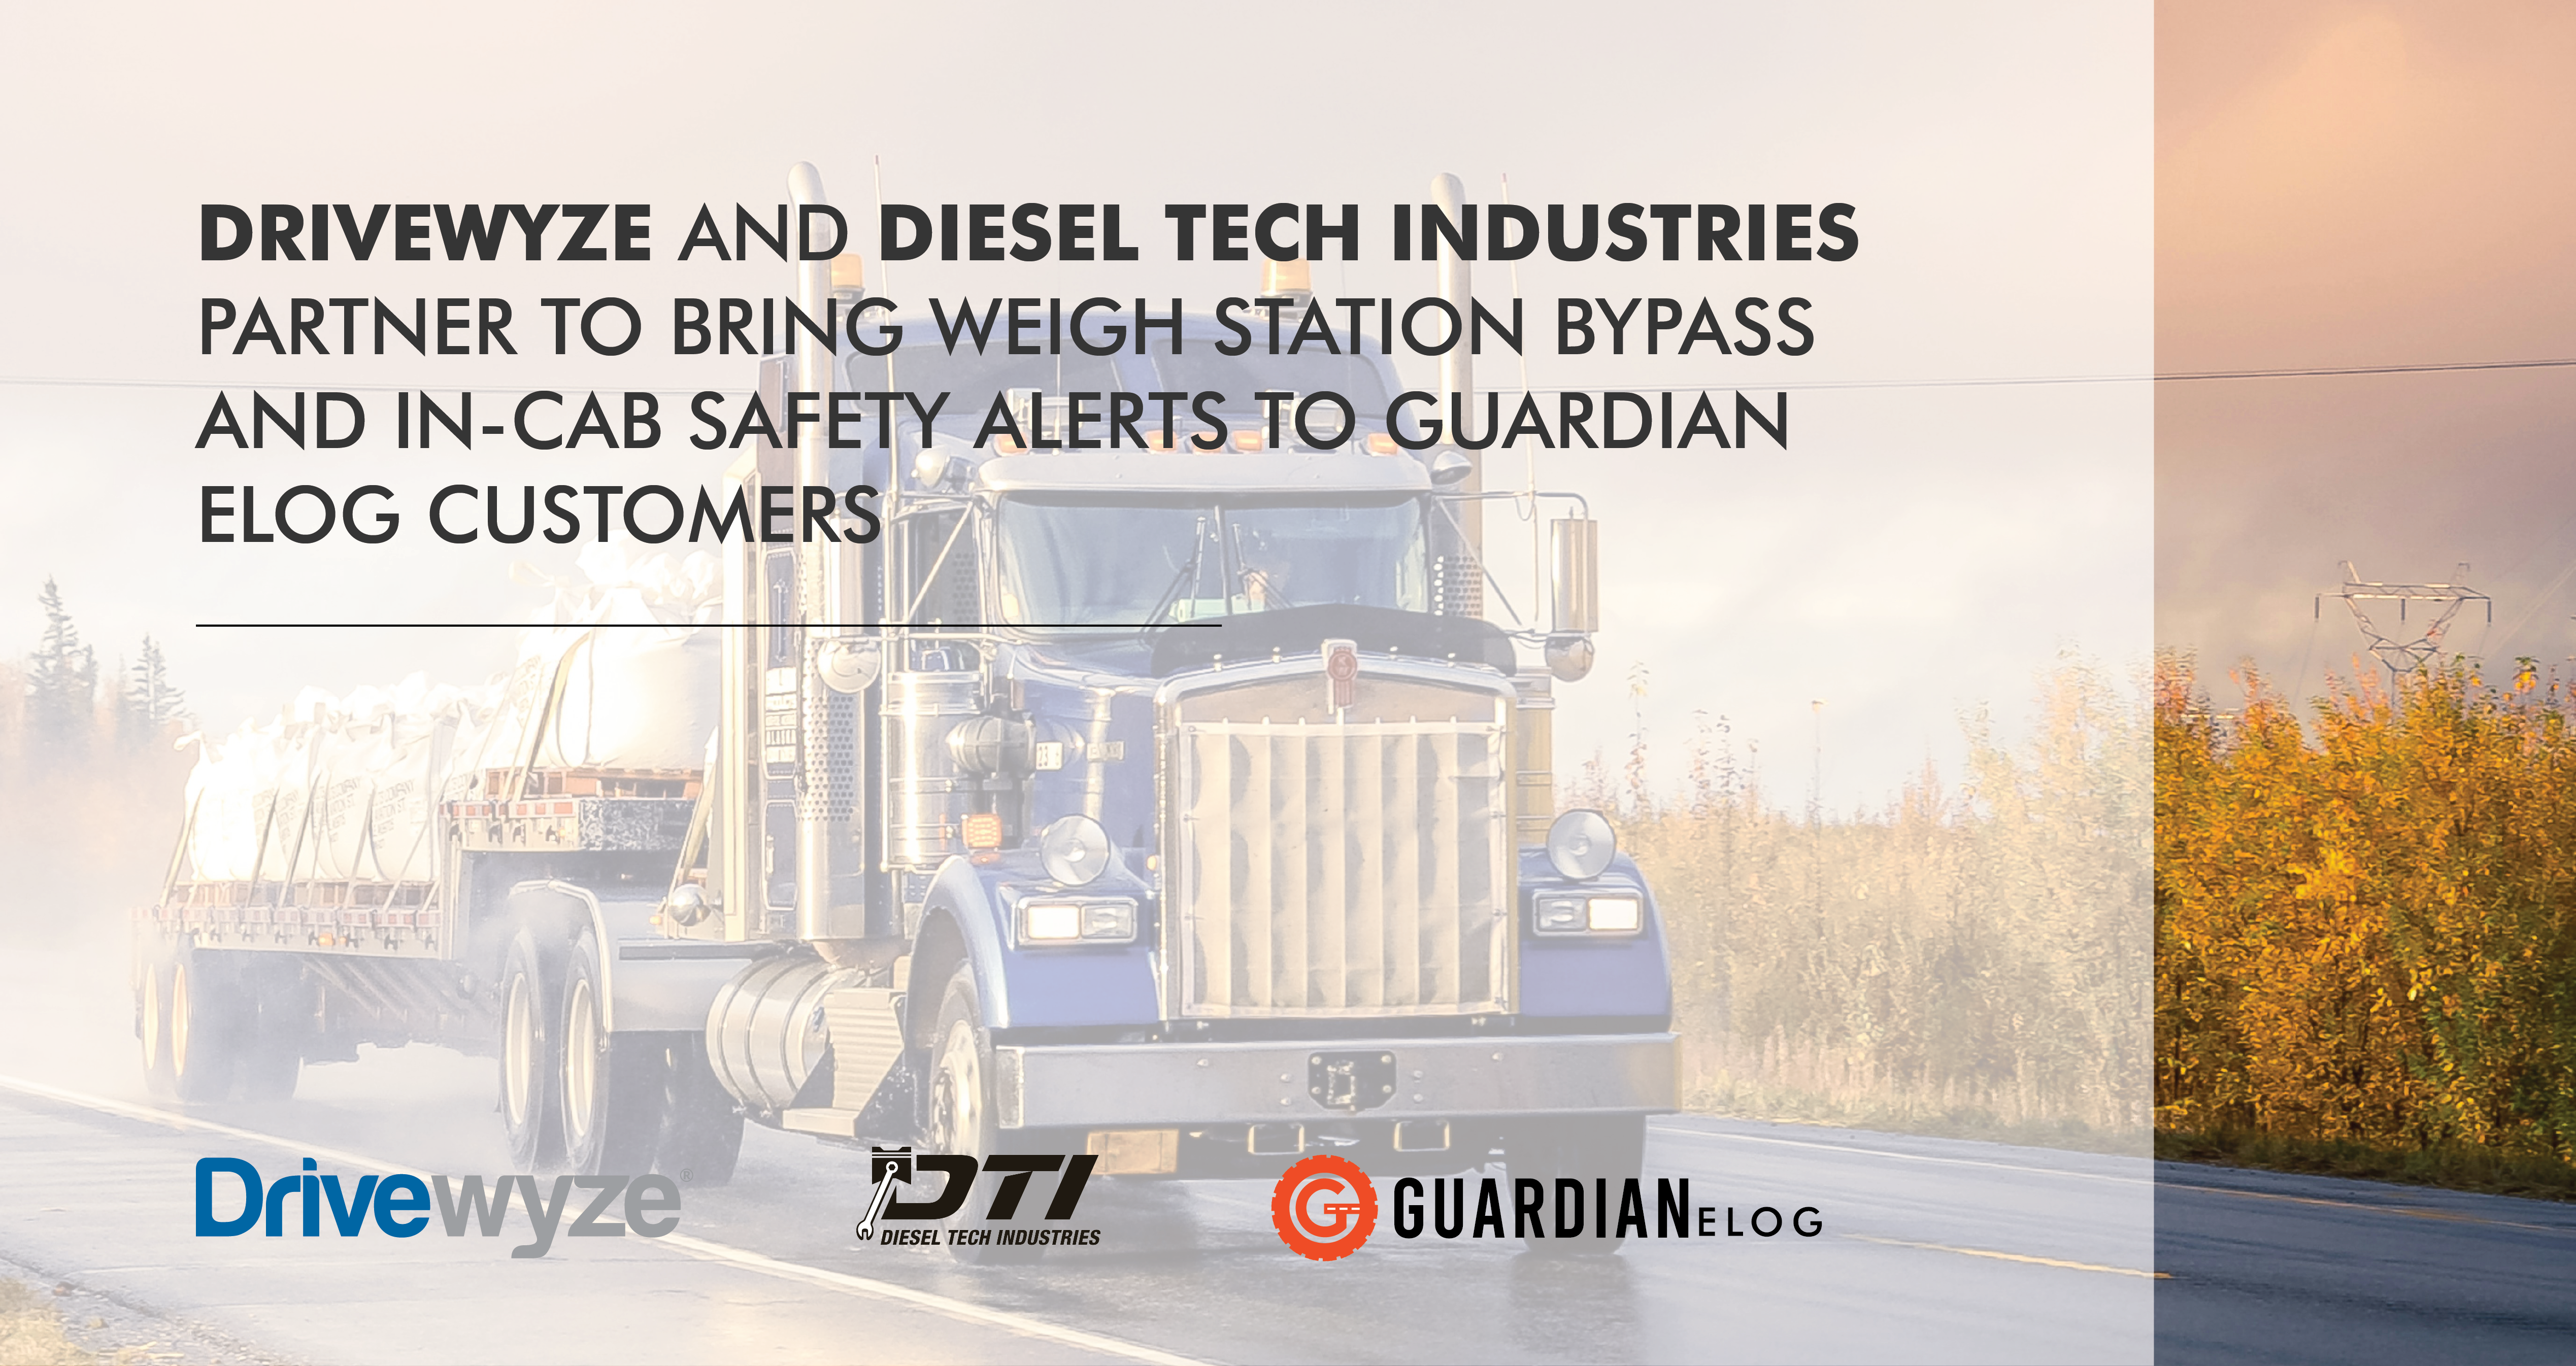 Drivewyze And Diesel Tech Industries Partner To Bring Weigh Station Bypass And In-Cab Safety Alerts To Guardian ELOG Customers